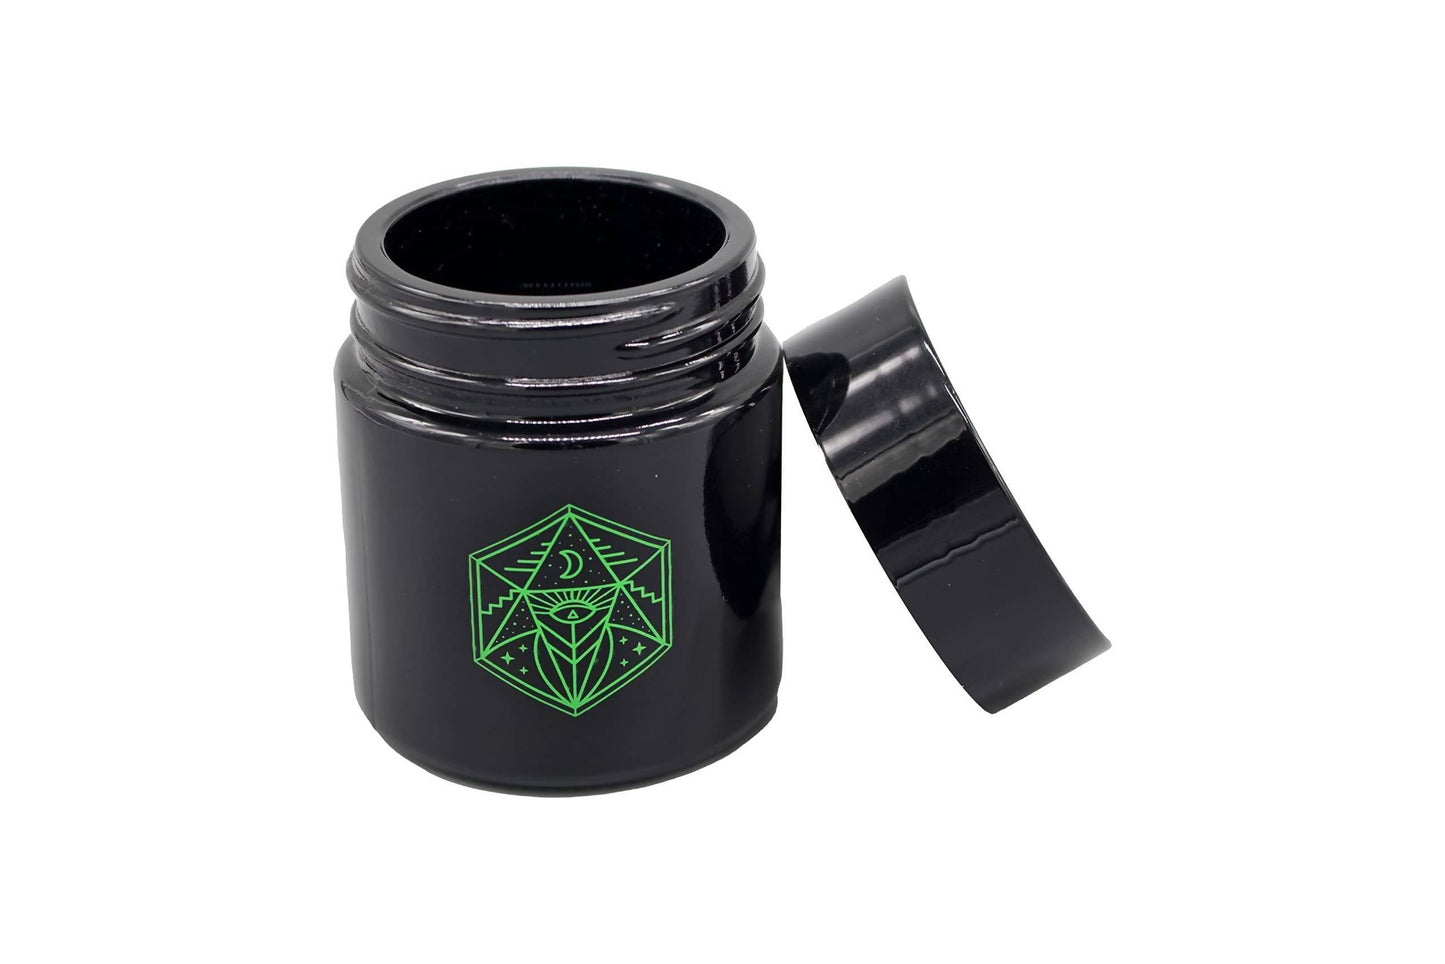 Small Glass Storage Jar and Lid - Real Printed Artwork - UV Protection - Helps Keep Goods Fresh with Light Protection- Tinted Black - 100 ml - Ancient Symbol Design - Accessories By Leaf-Way Brand_3